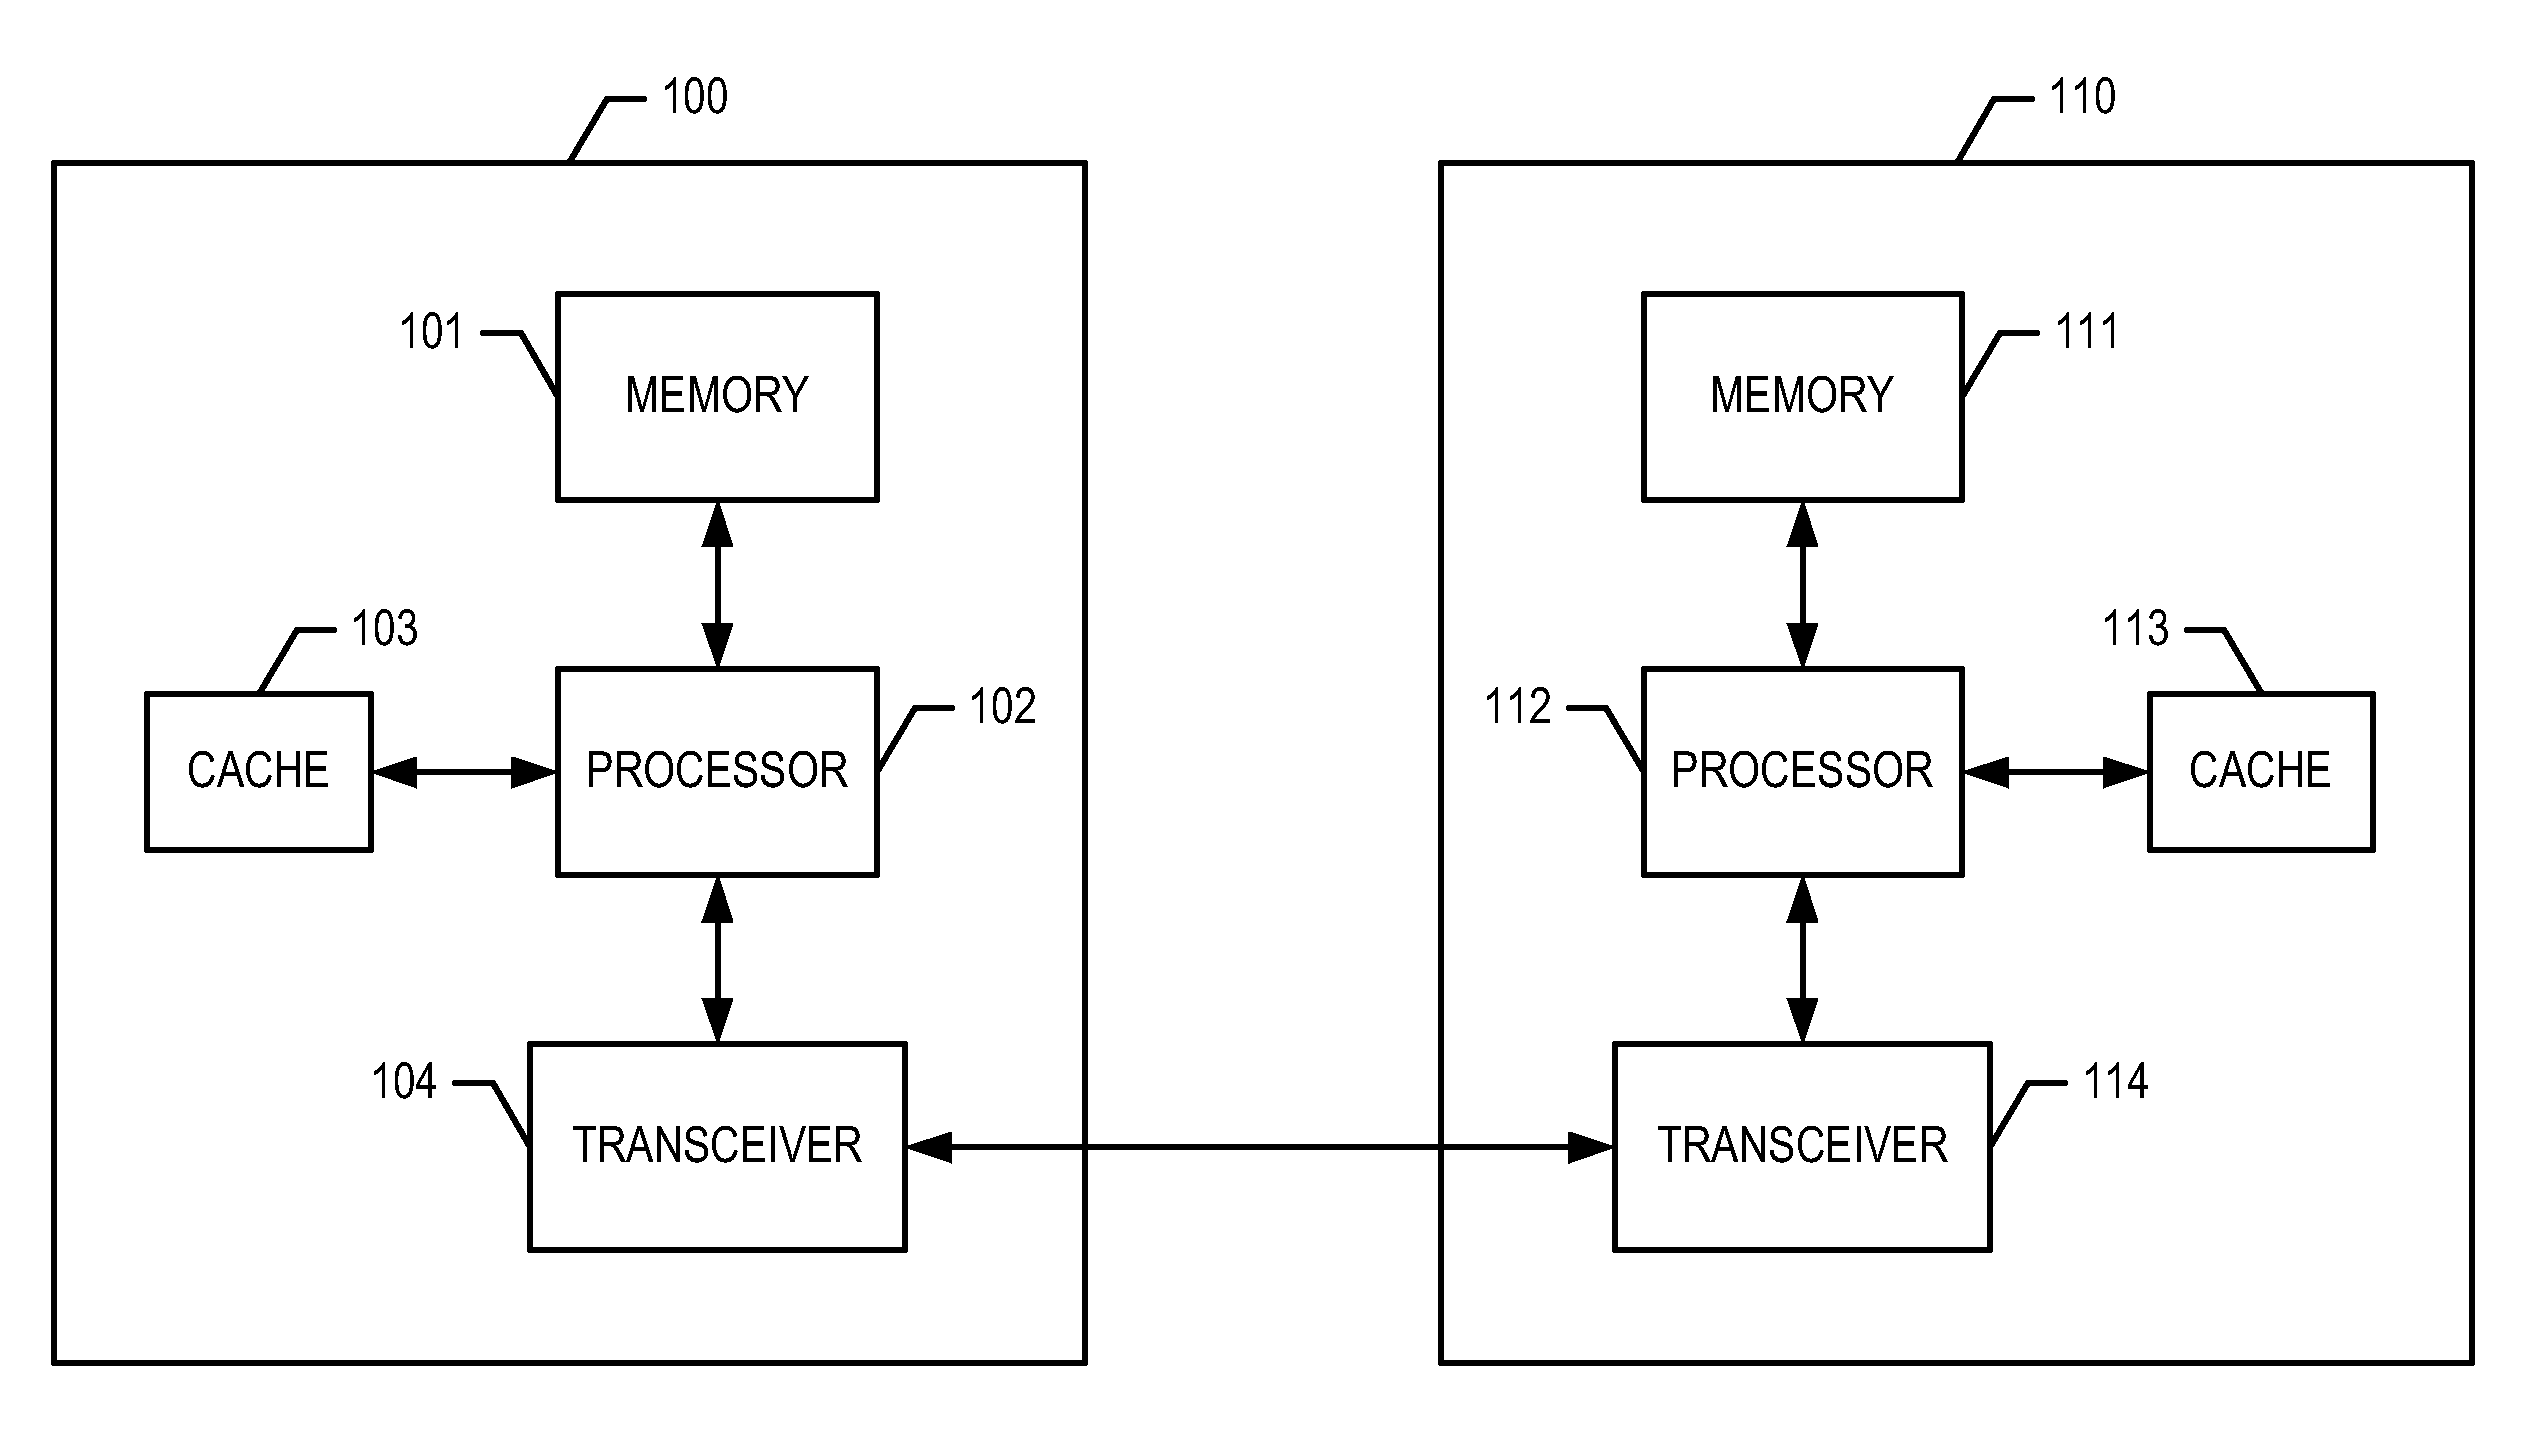 Cache management for increasing performance of high-availability multi-core systems